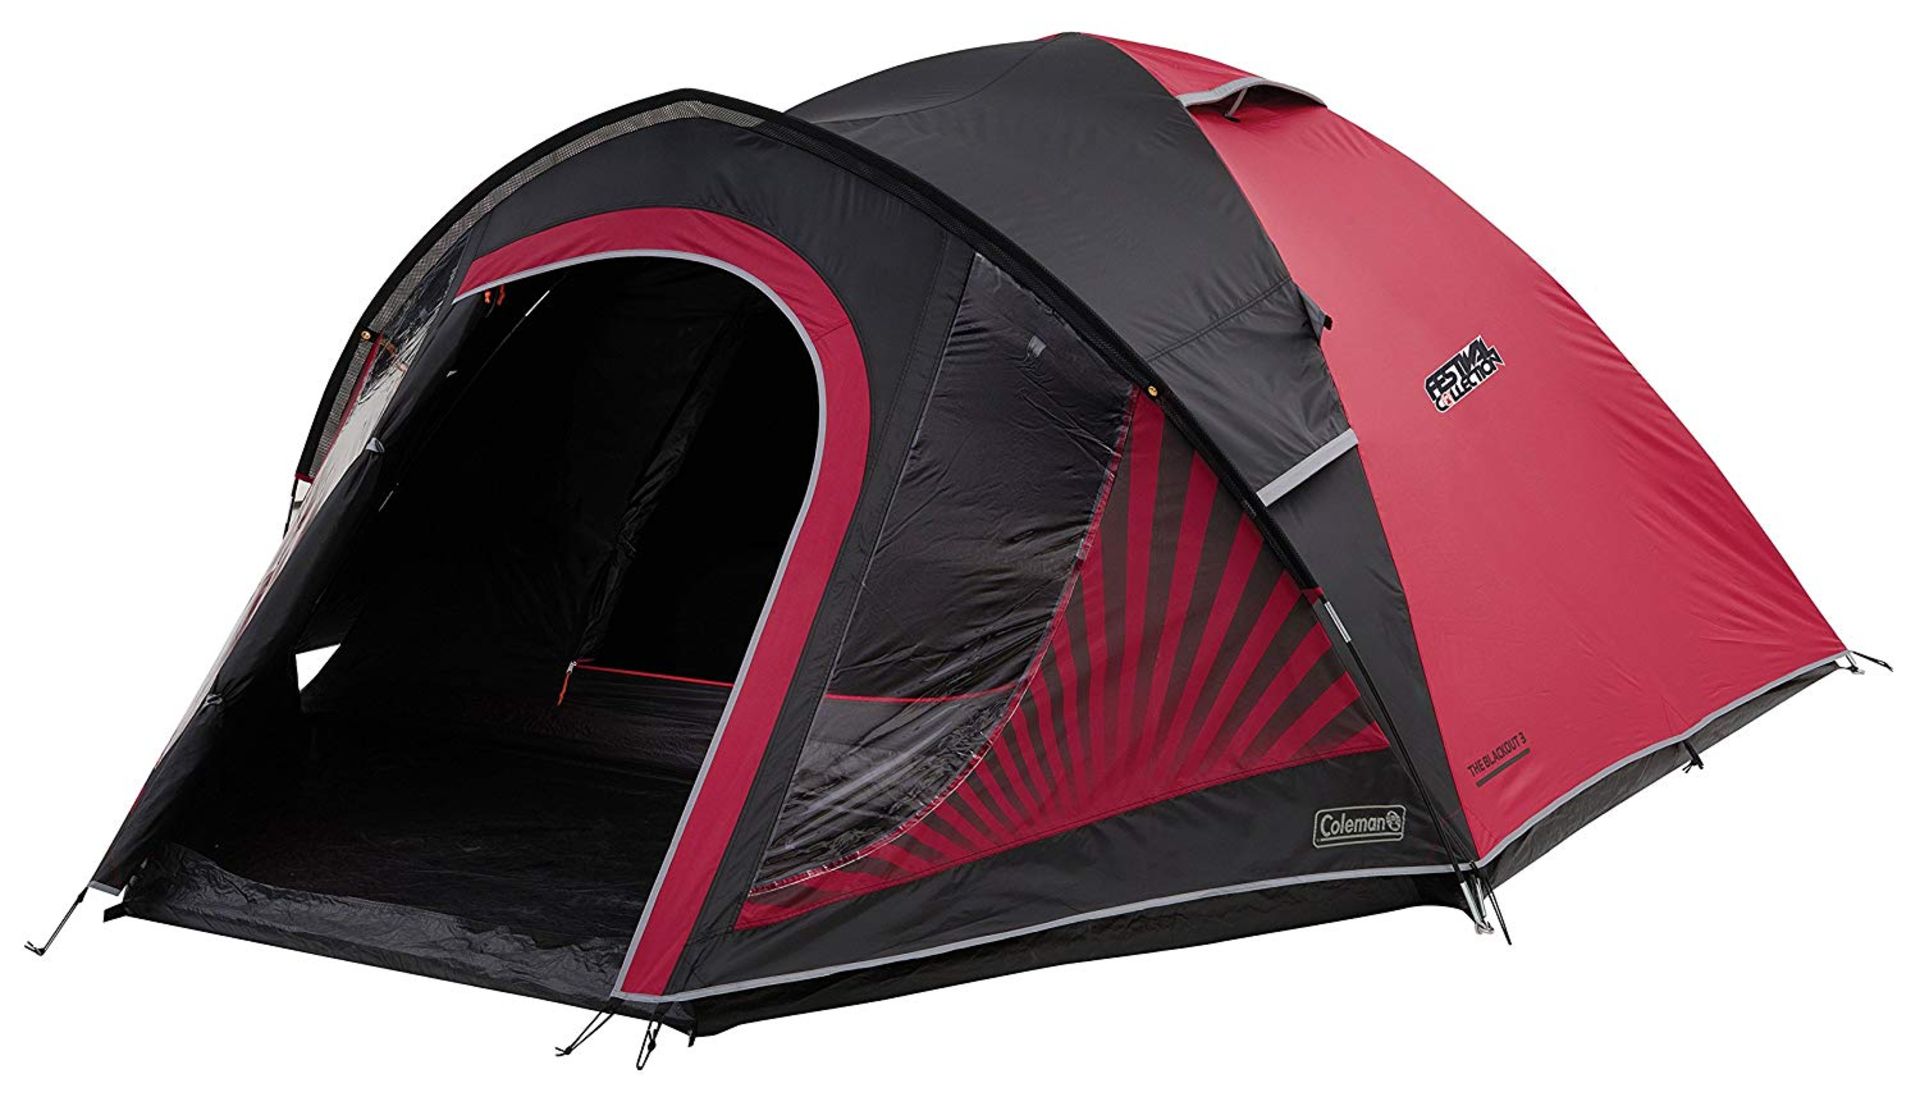 Coleman Tent The BlackOut, Festival Camping 3 Persons tent RRP £159.99